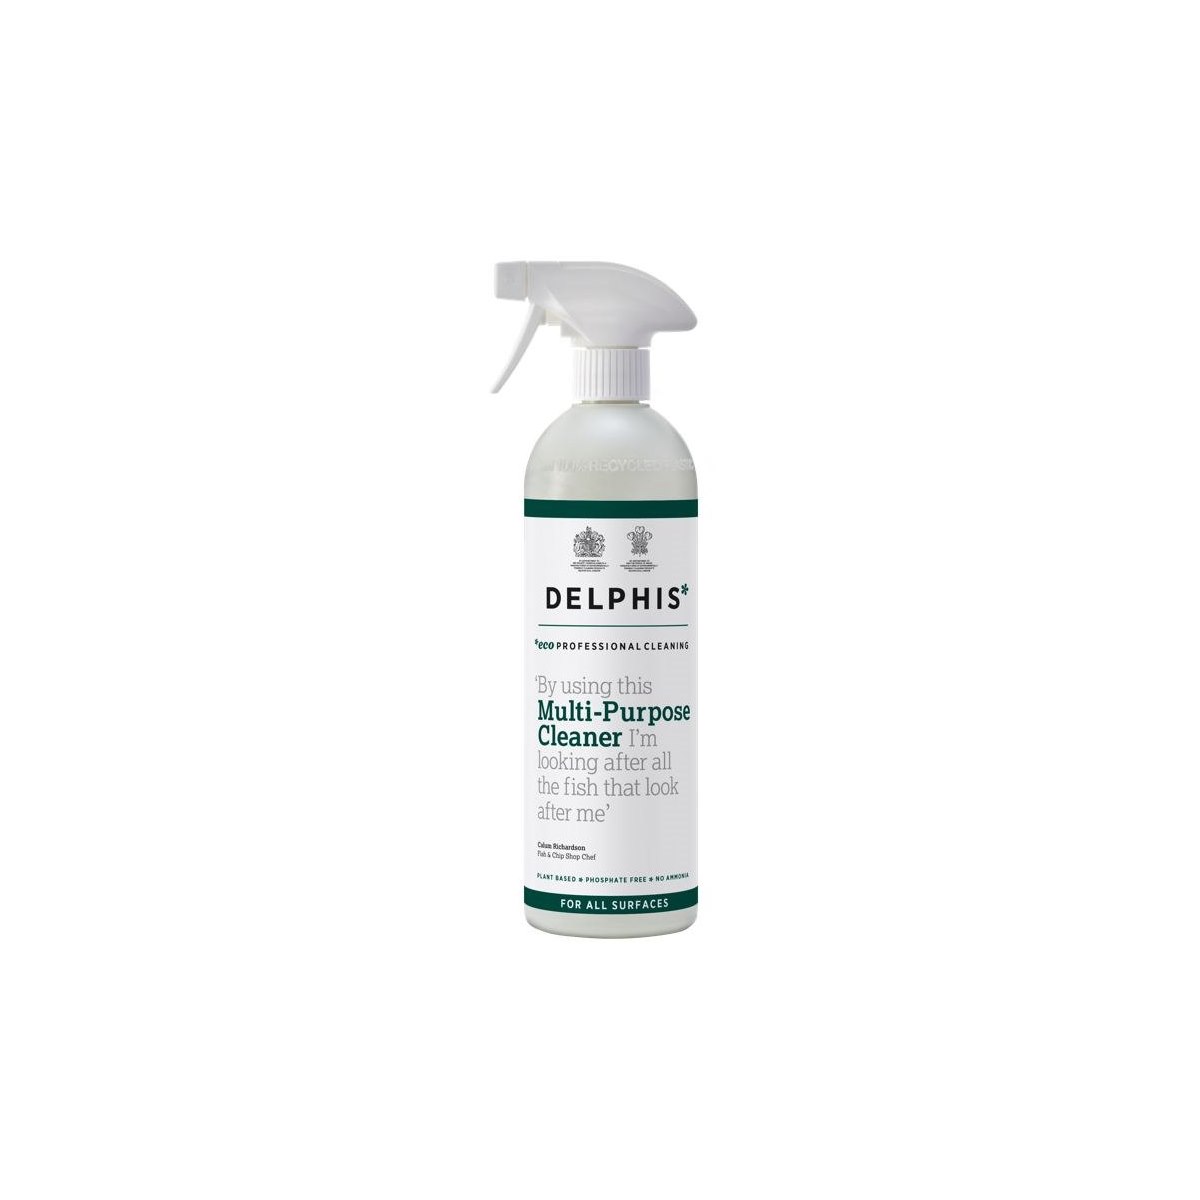 Delphis Eco Professional Cleaning Multi-Purpose Cleaner Spray